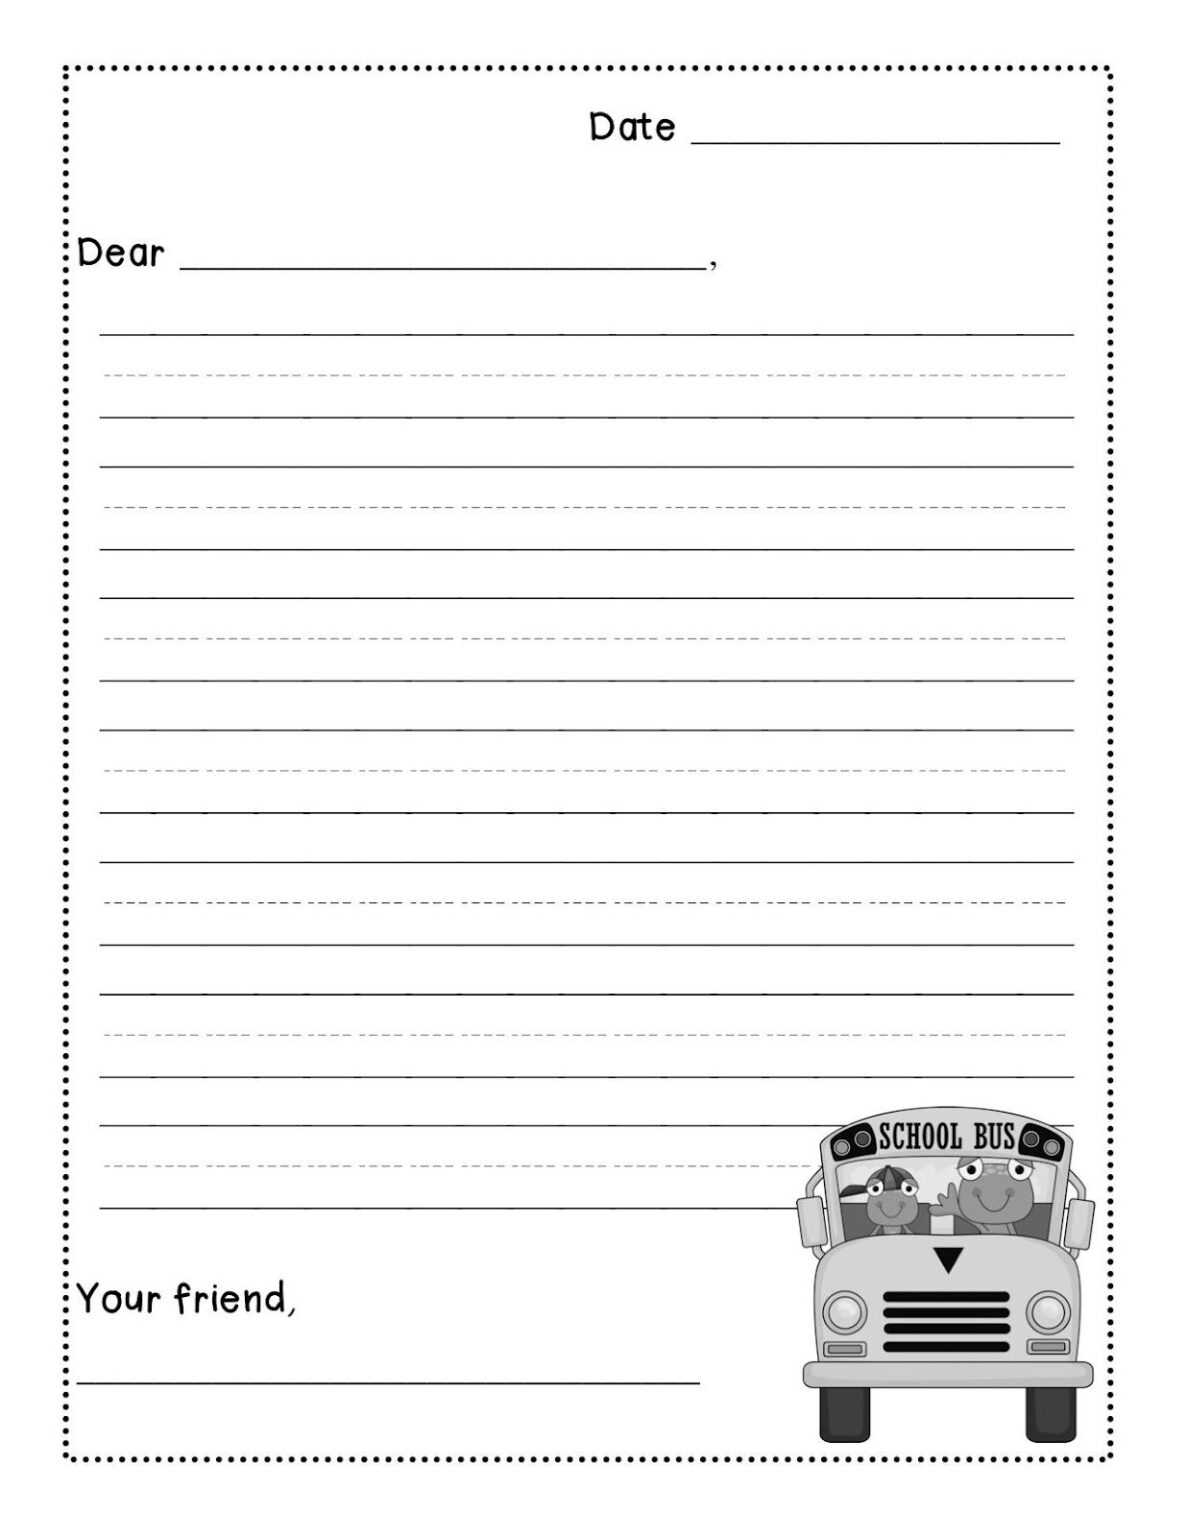 great-parts-of-a-letter-worksheet-pdf-parts-of-a-friendly-letter-worksheet-friendly-letter